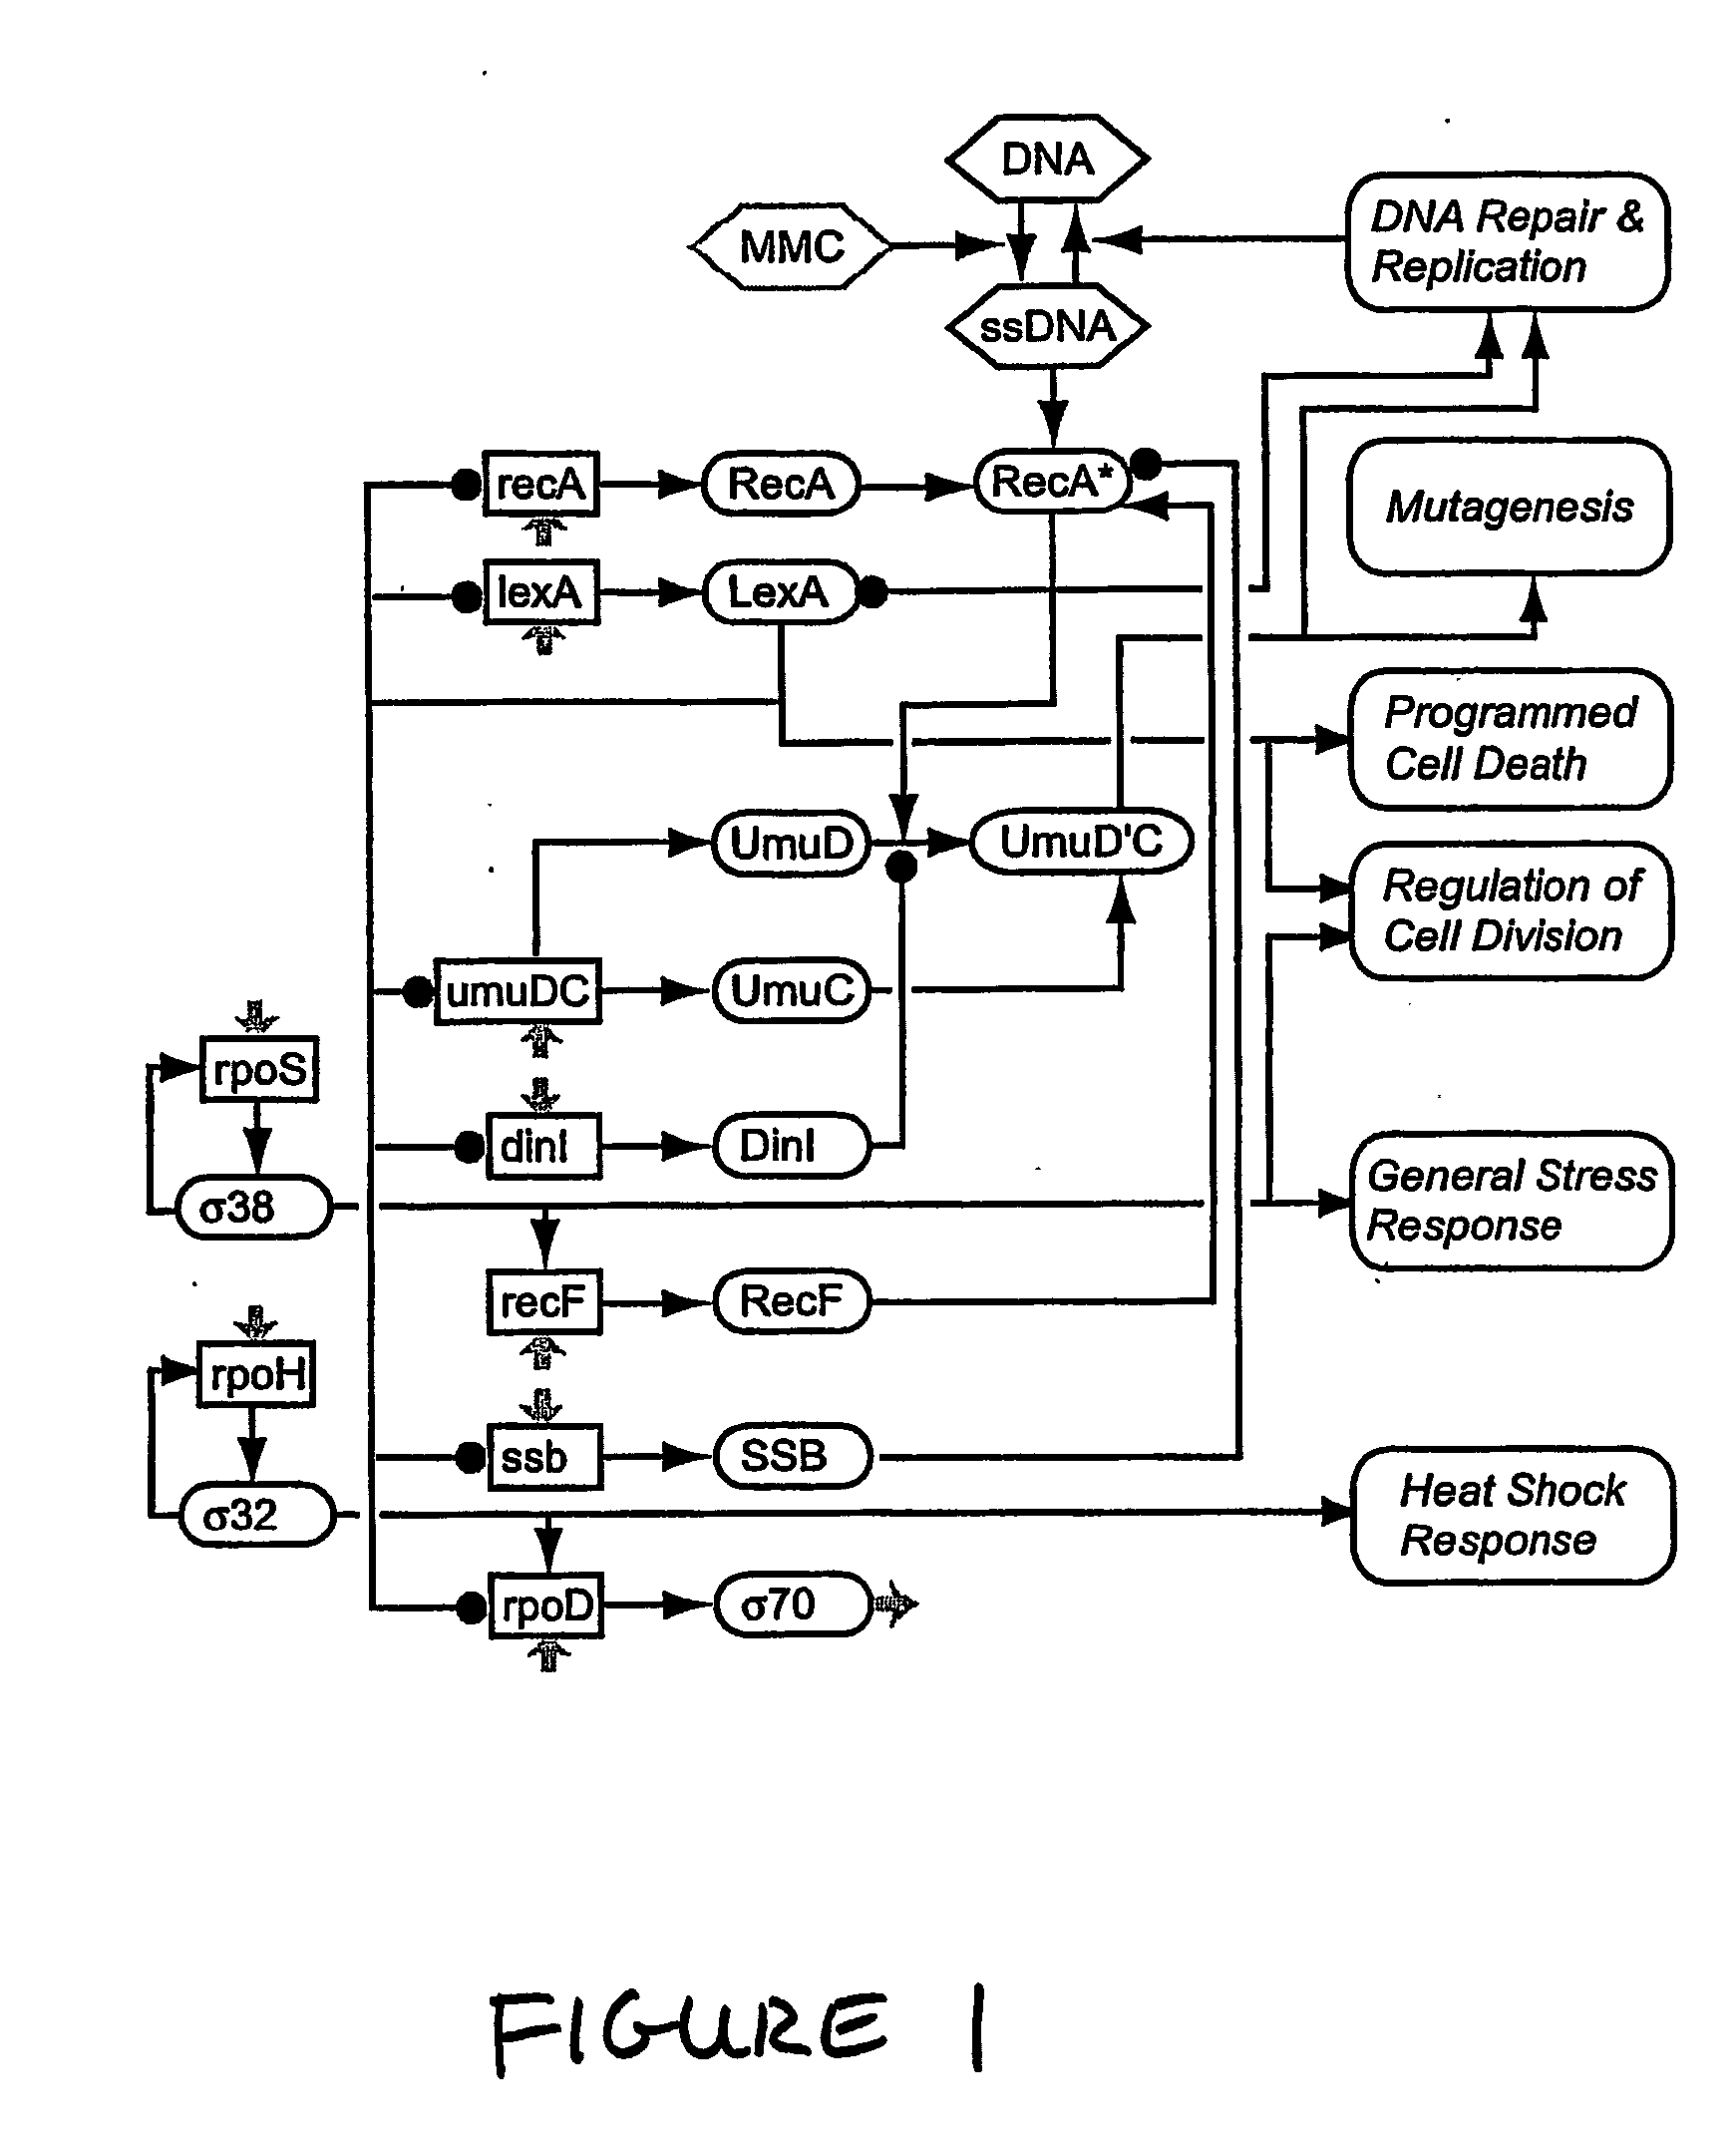 Systems and methods for reverse engineering models of biological networks